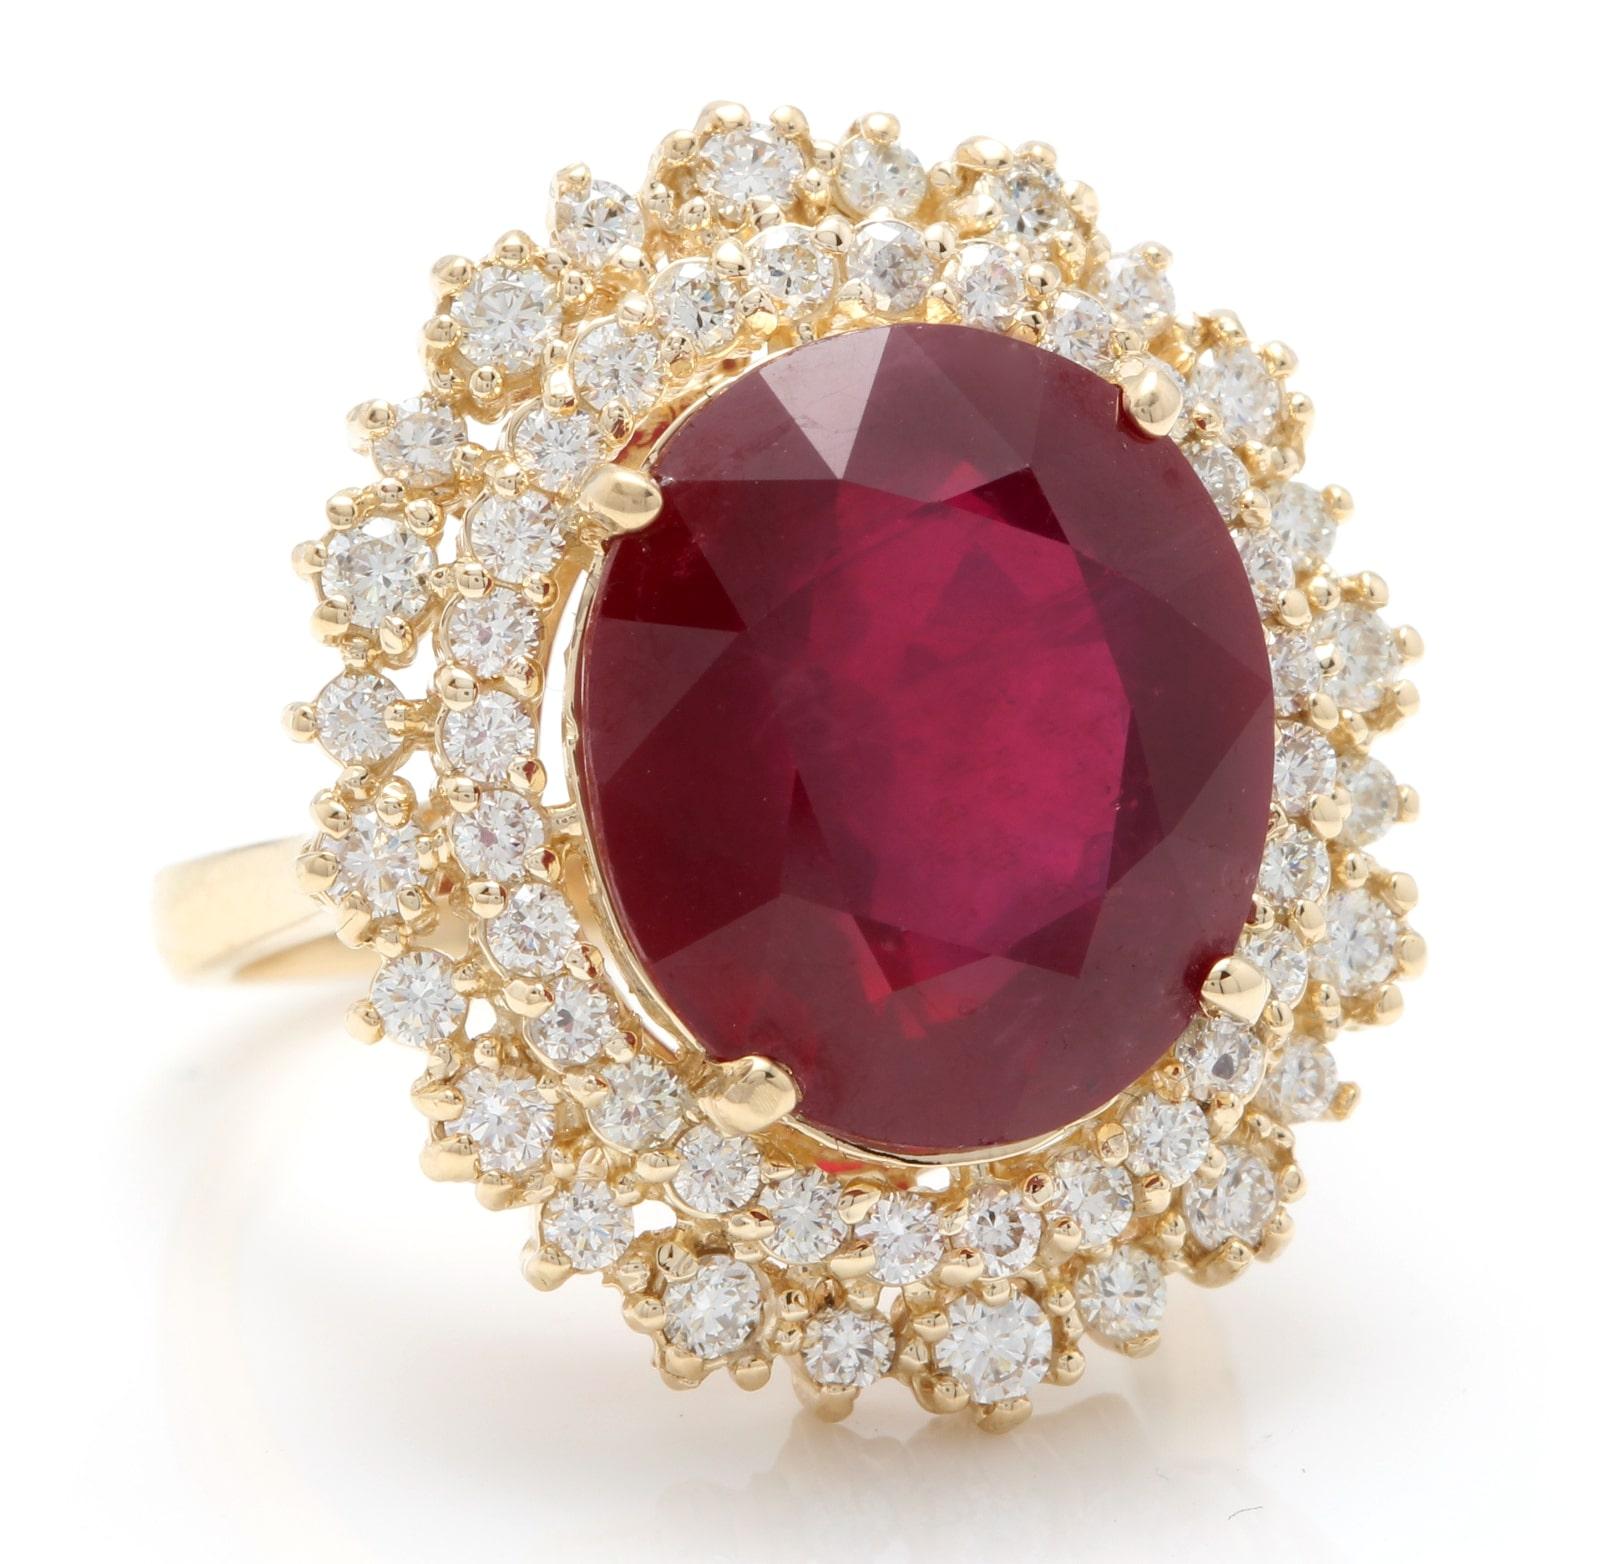 17.60 Carats Impressive Red Ruby and Diamond 14K Yellow Gold Ring

Total Red Ruby Weight is: 16.00 Carats (glass-filled)

Ruby Measures: 14.50 x 12.70mm

Natural Round Diamonds Weight: 1.60 Carats (color G-H / Clarity SI1-SI2)

Ring size: 7 (we